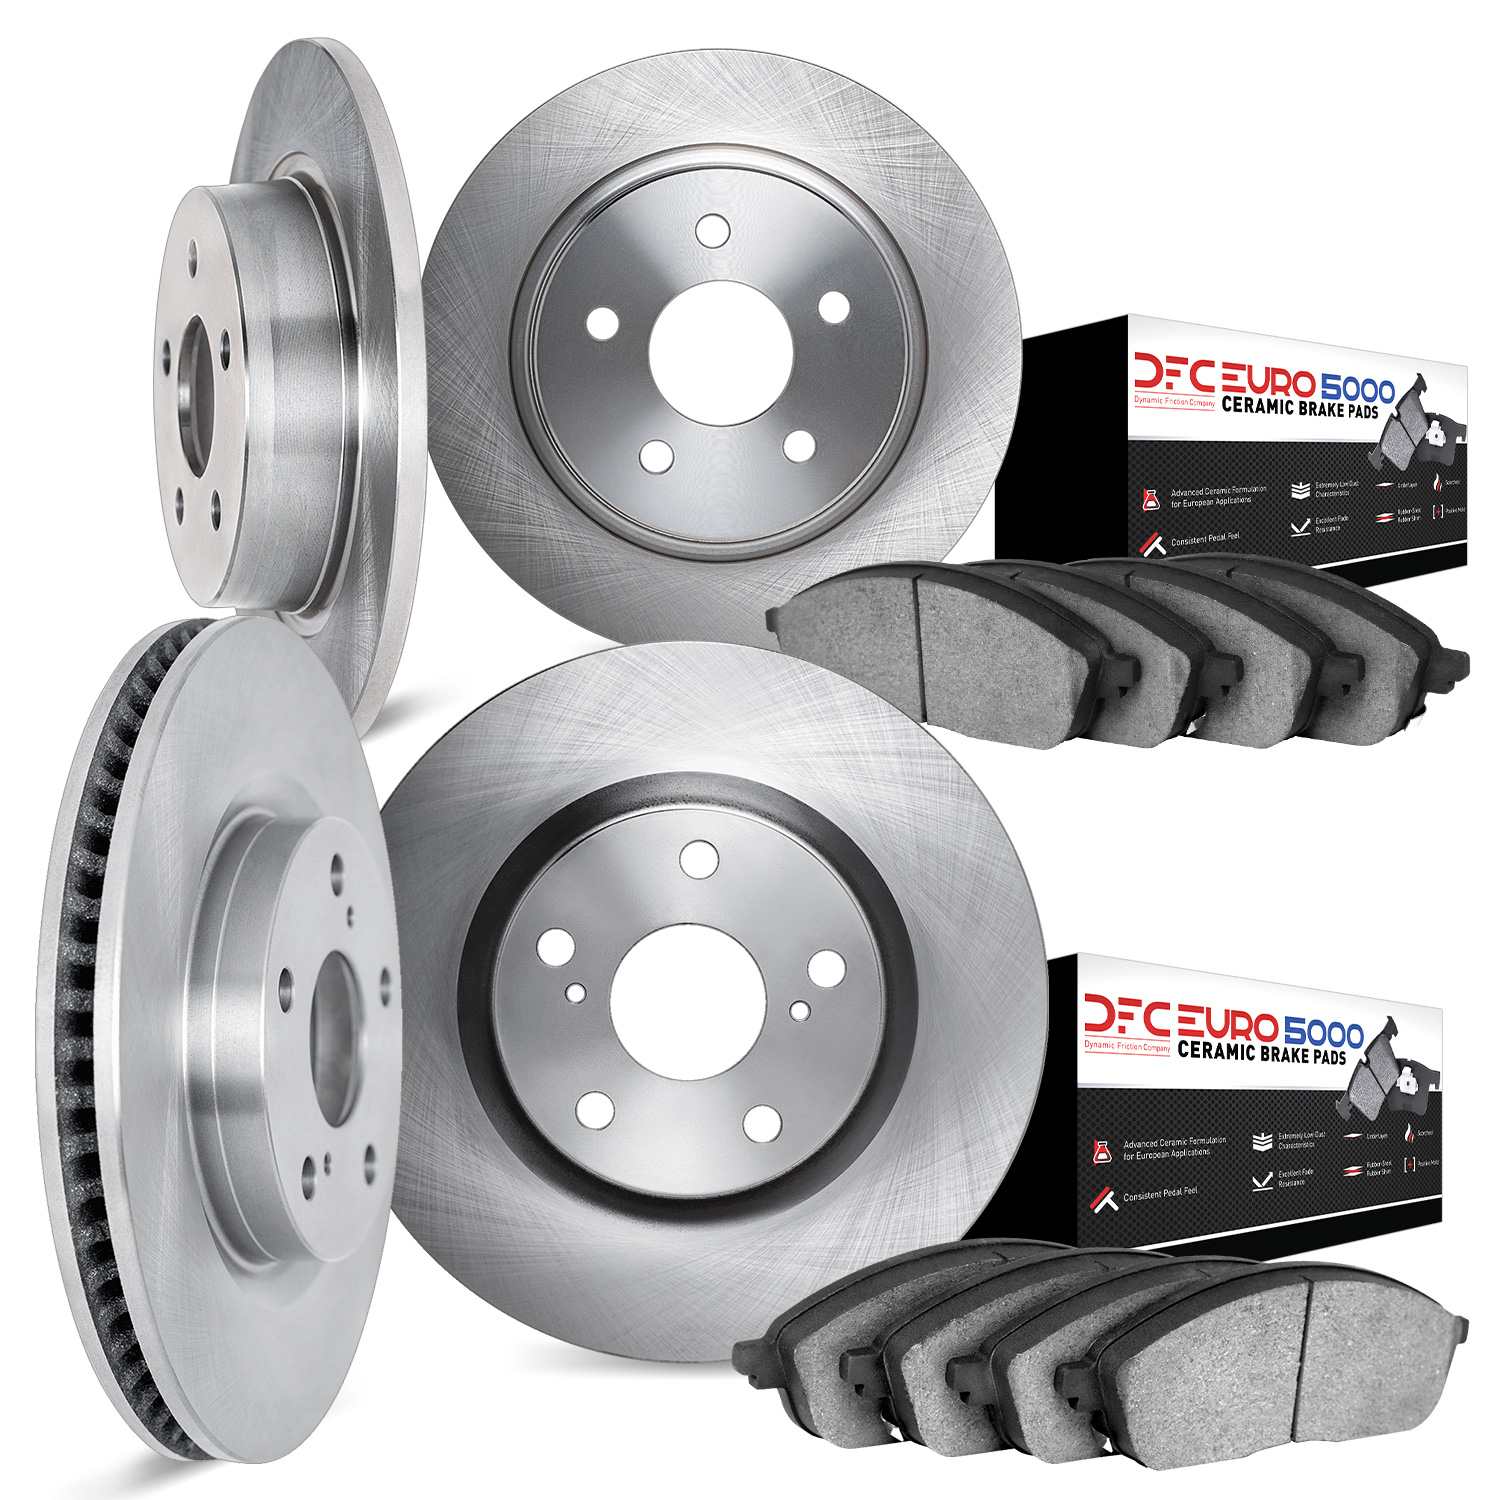 6604-63011 Brake Rotors w/5000 Euro Ceramic Brake Pads, 2001-2015 Mercedes-Benz, Position: Front and Rear